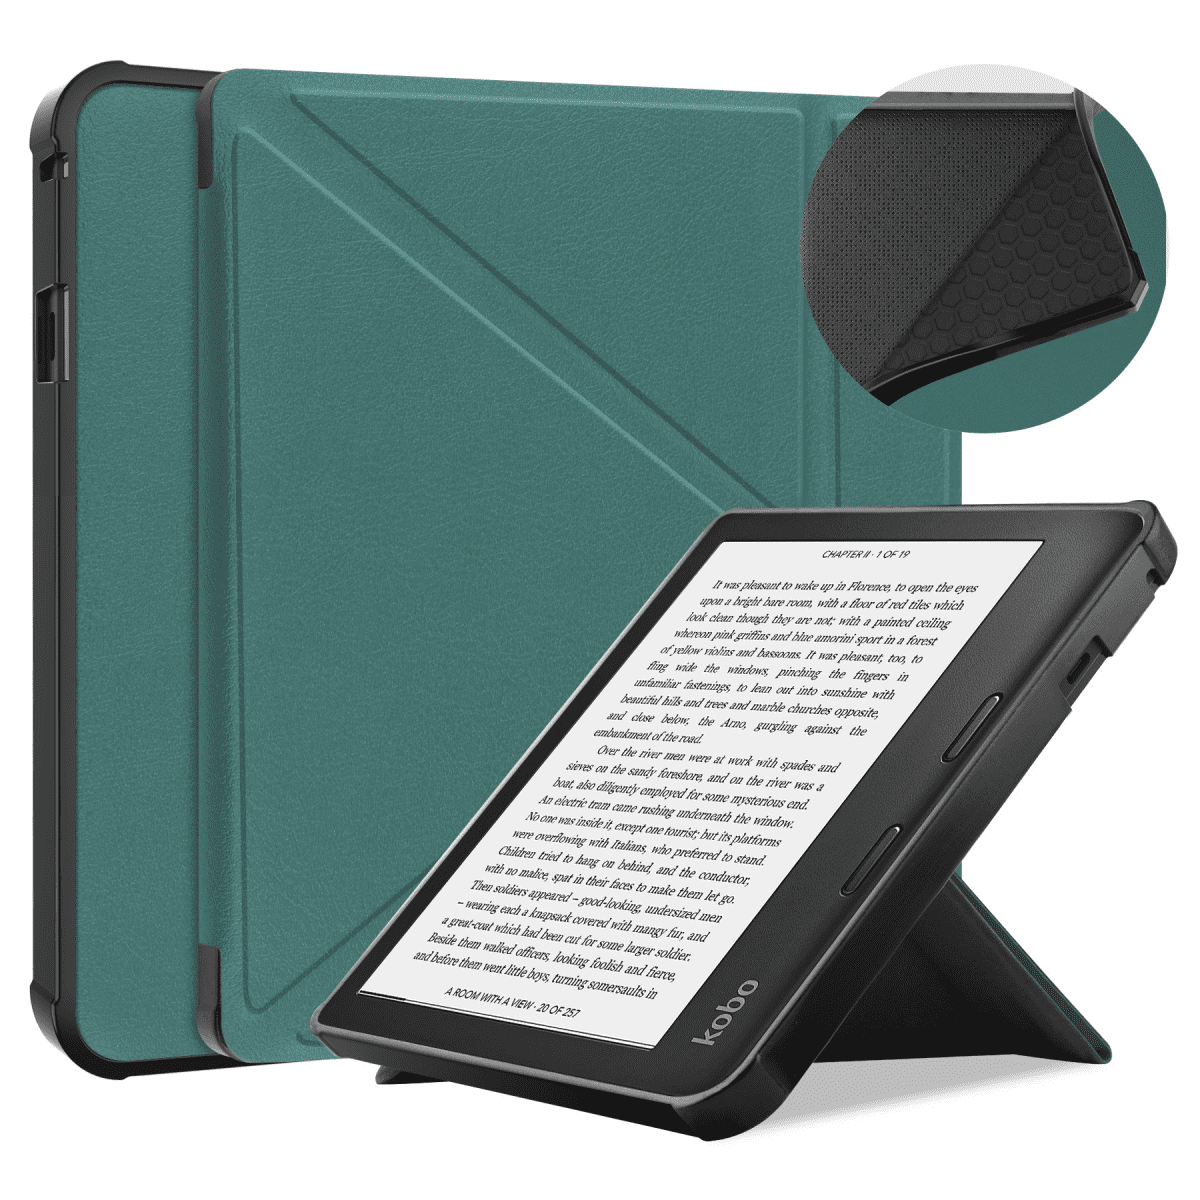 SAYTAY For Kobo Sage 8" E-Reader Released 2021, TPU Matte Back Cover, Slim Smart Folio Cover with Magnetic Closure and Stand Green - Walmart.com